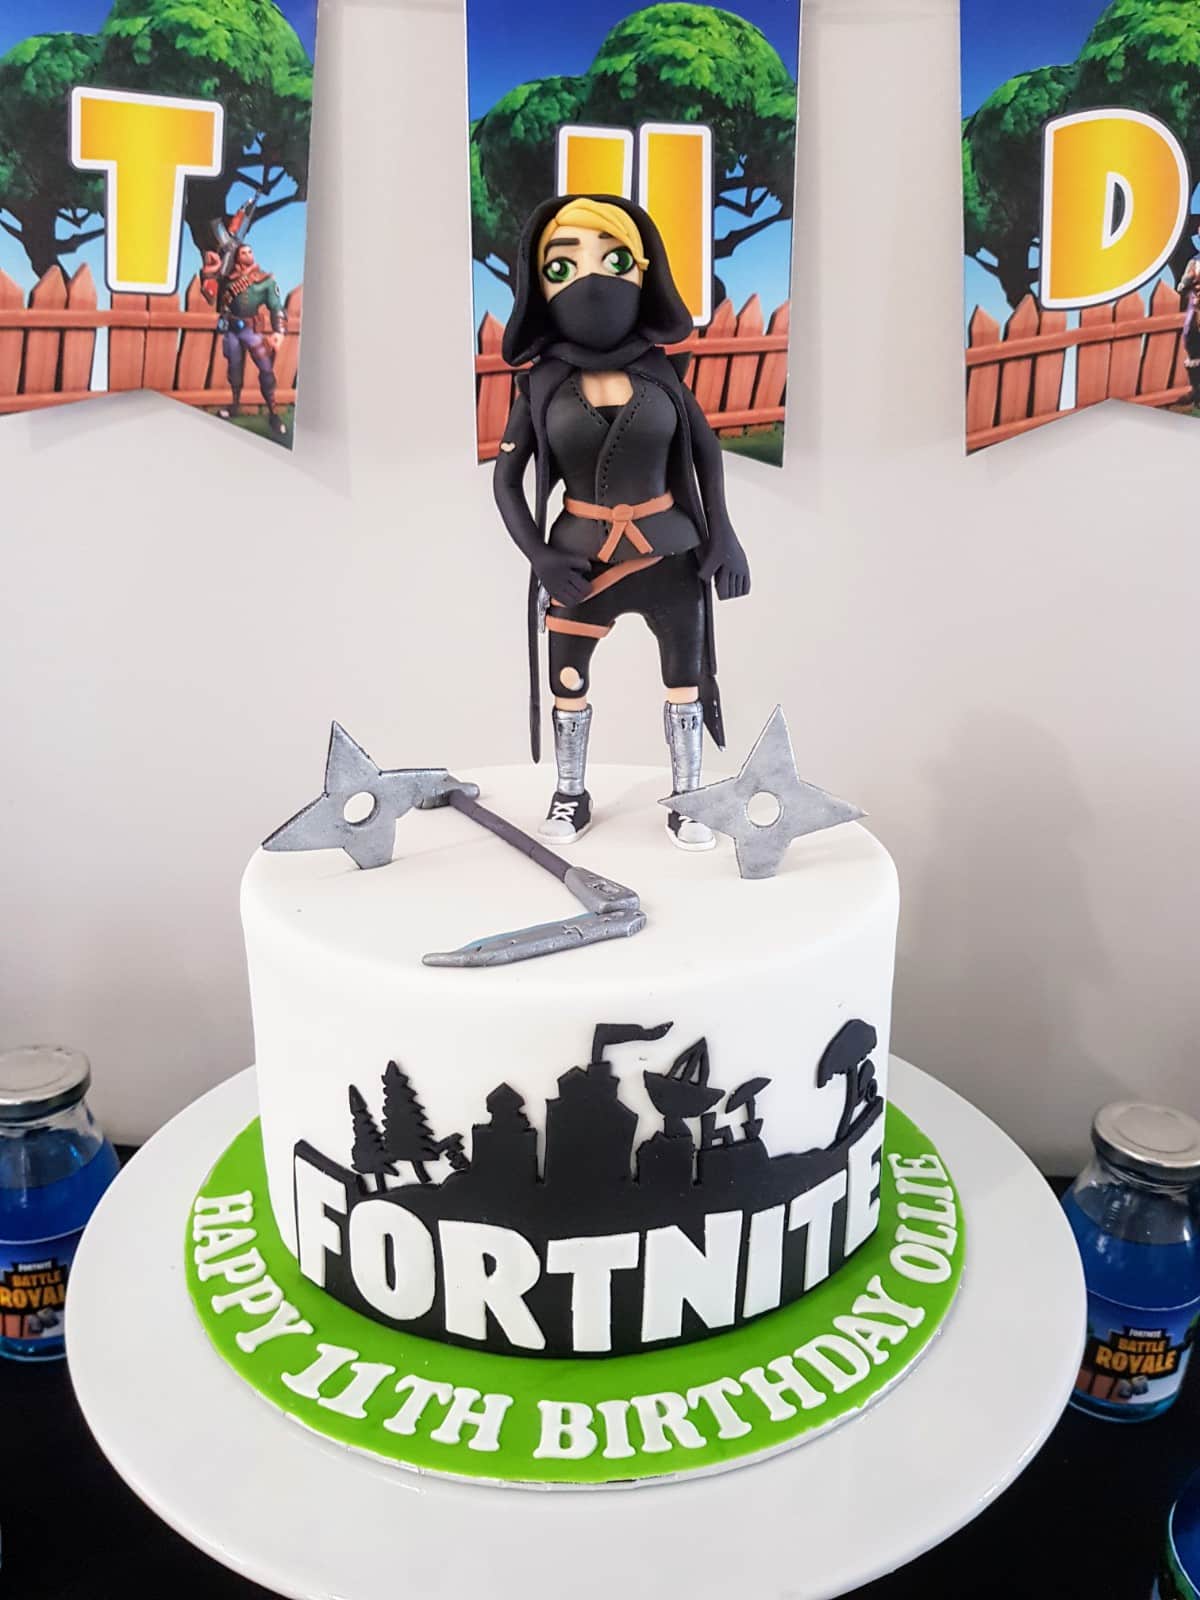 Fortnite Birthday Party Ideas and Themed Supplies ... - 1200 x 1600 jpeg 316kB